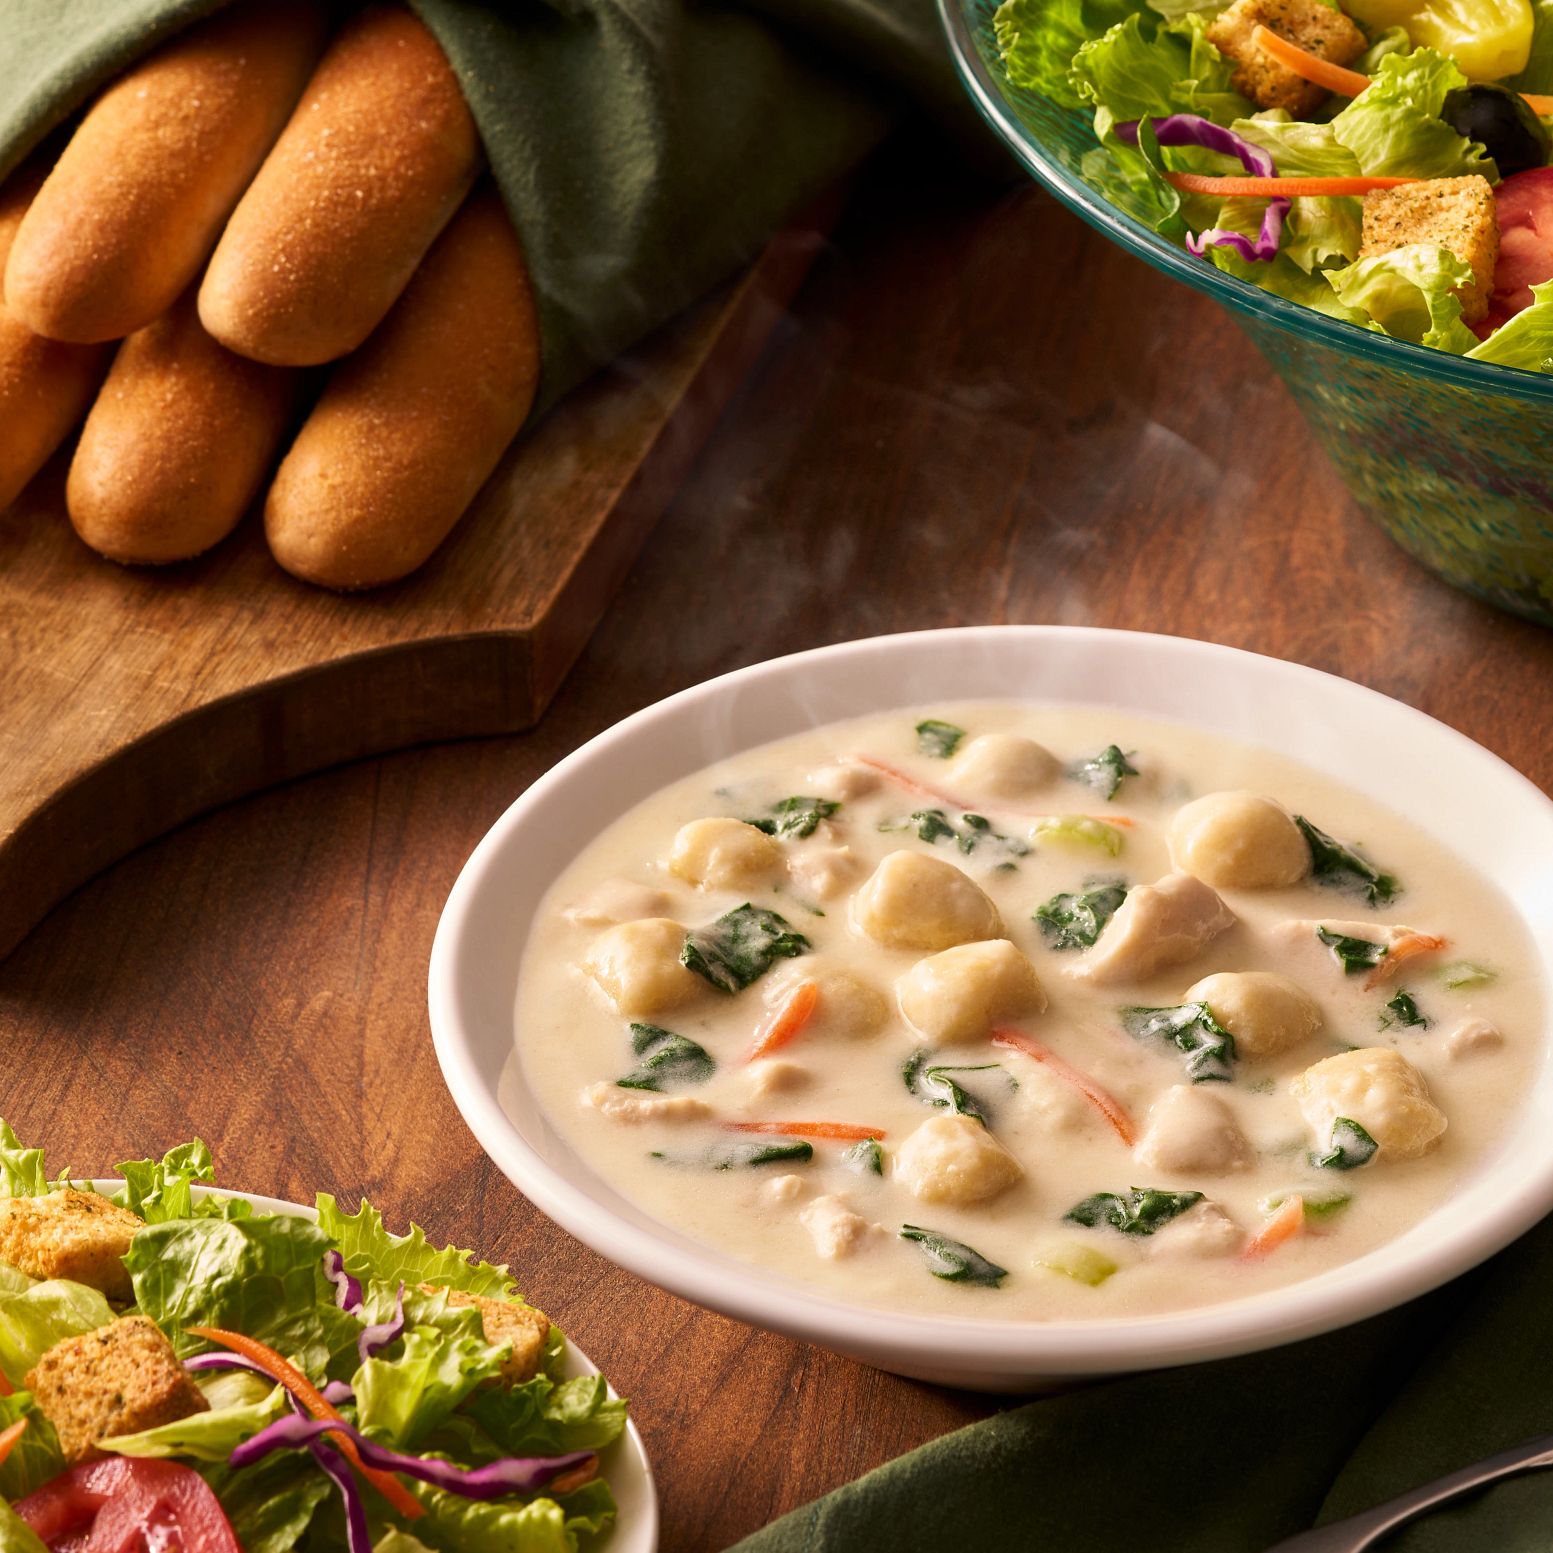 Chicken & Gnocchi: A creamy soup made with roasted chicken, Italian dumplings and spinach. Olive Garden Italian Restaurant Dearborn (313)240-6100